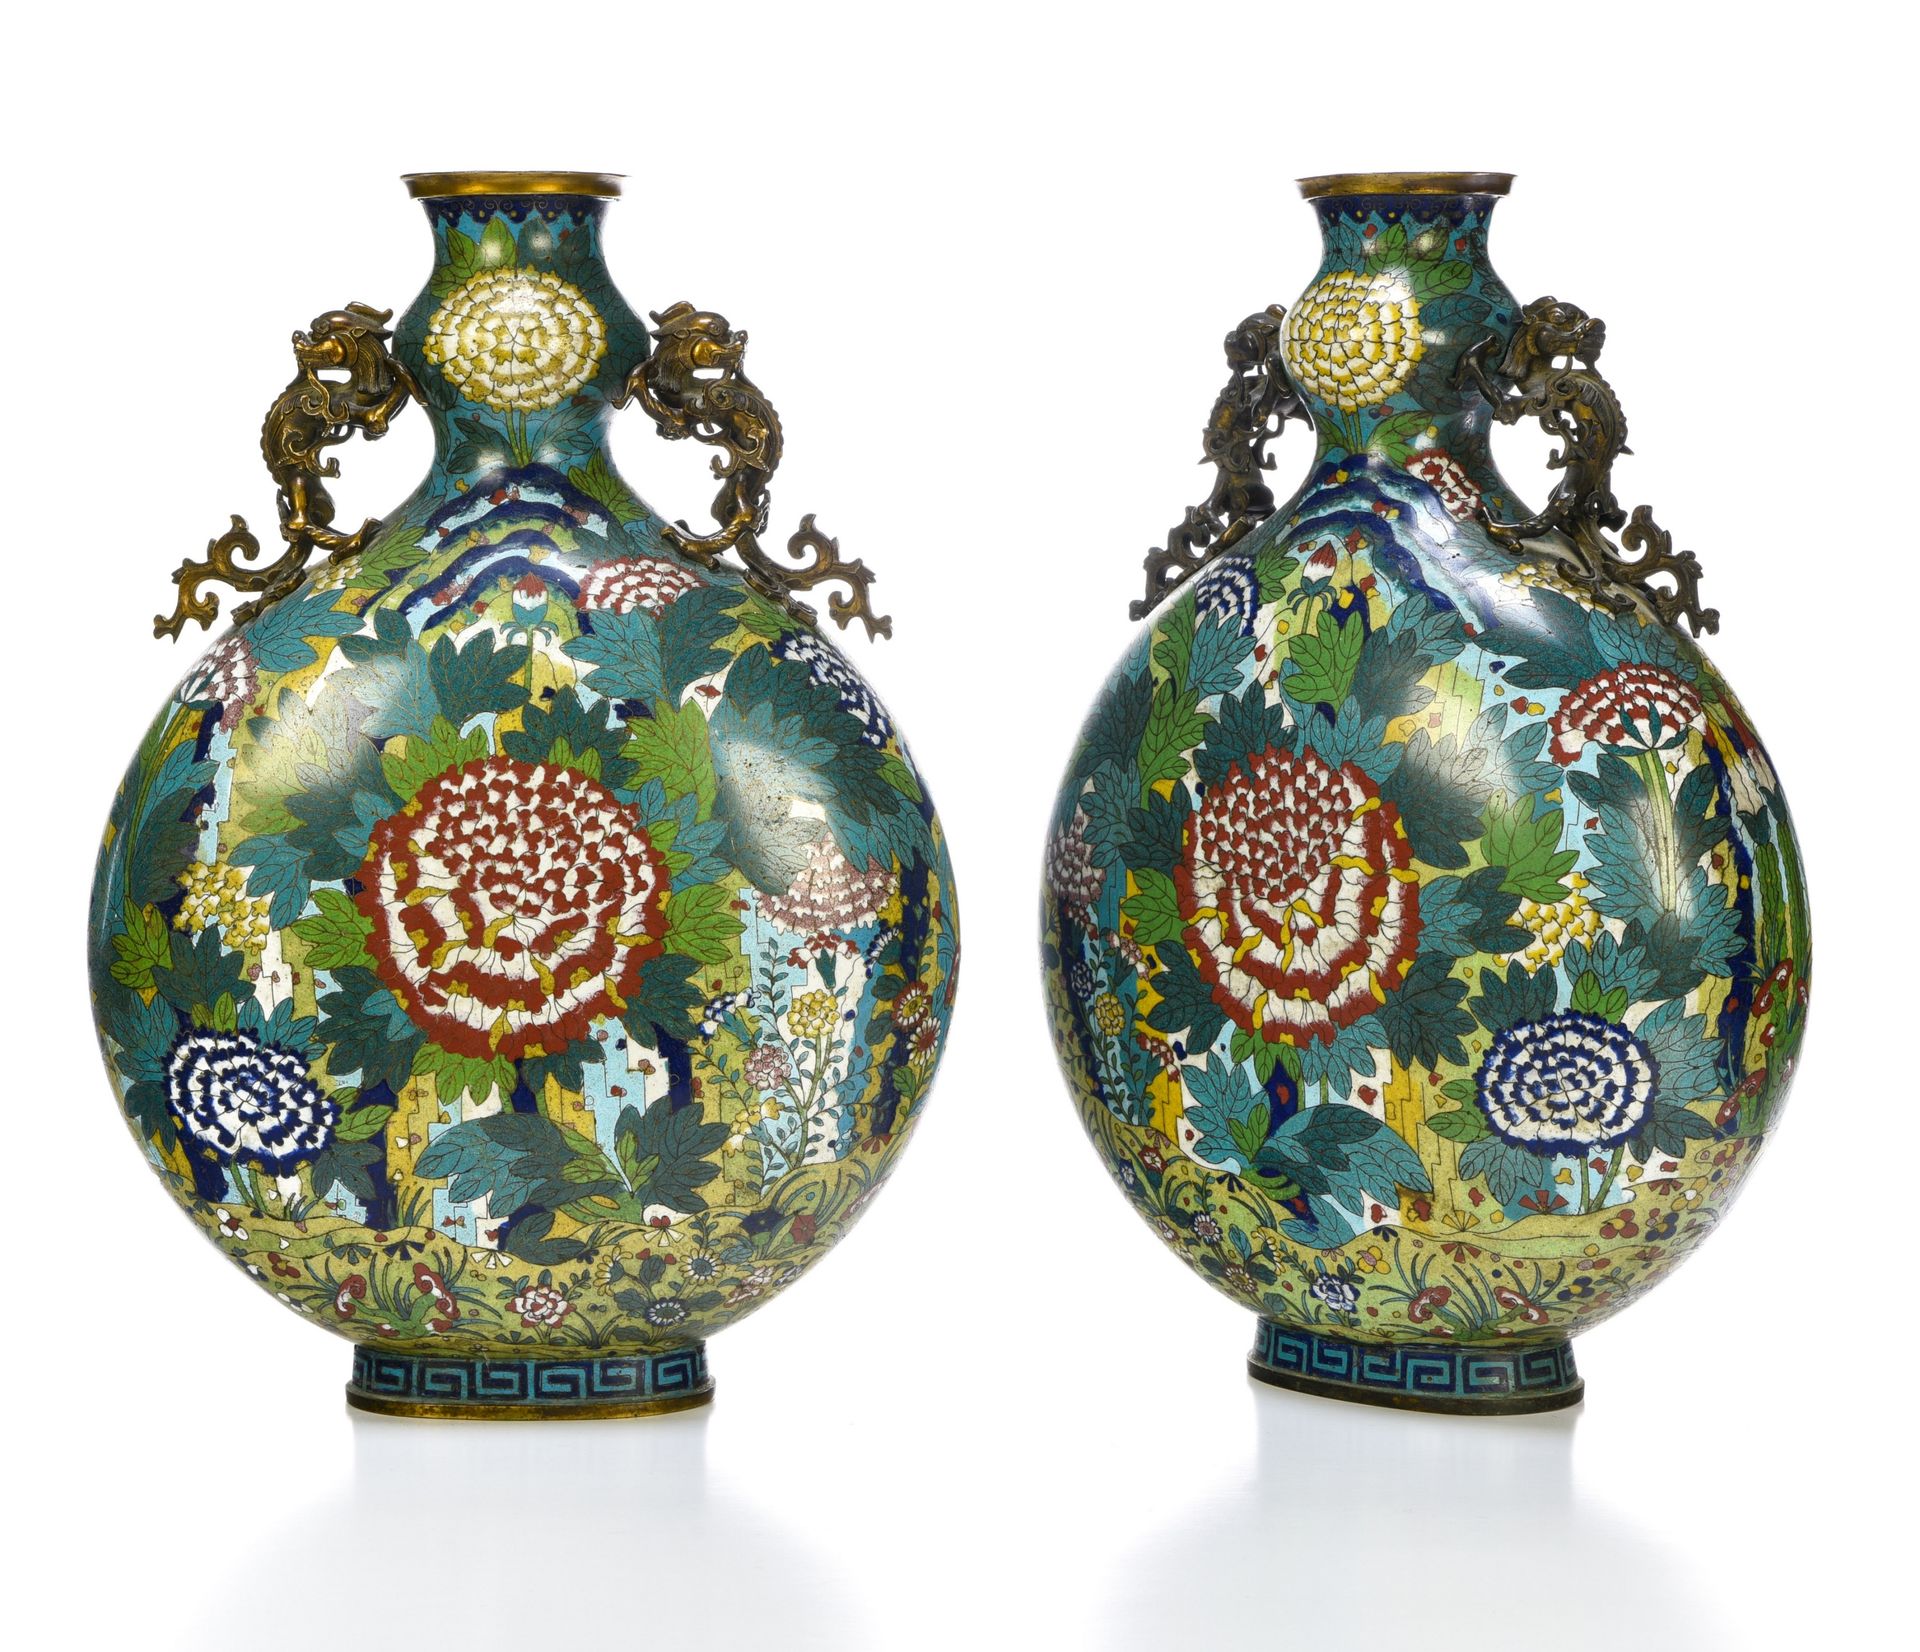 Null Pair of gourds

CHINA - JIAQING ERA (1796-1820)

Gilt bronze and cloisonné &hellip;